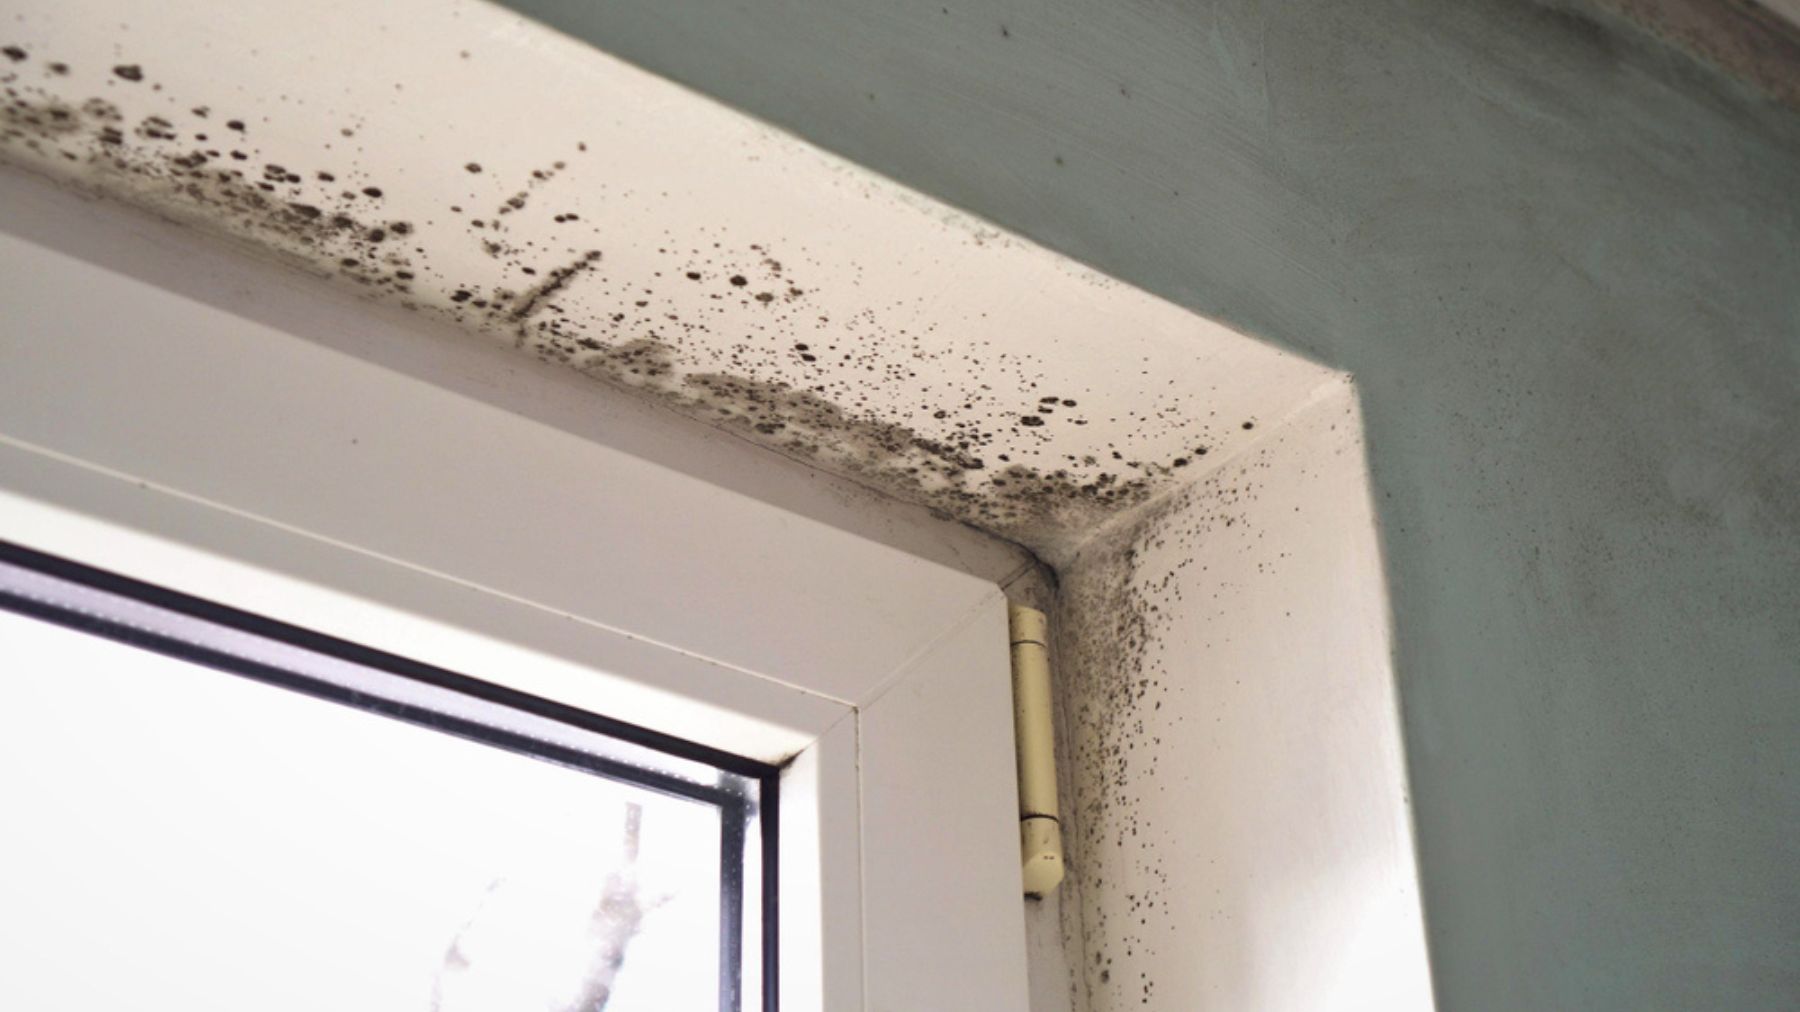 Mold in your house: here are 12 natural remedies to eliminate it